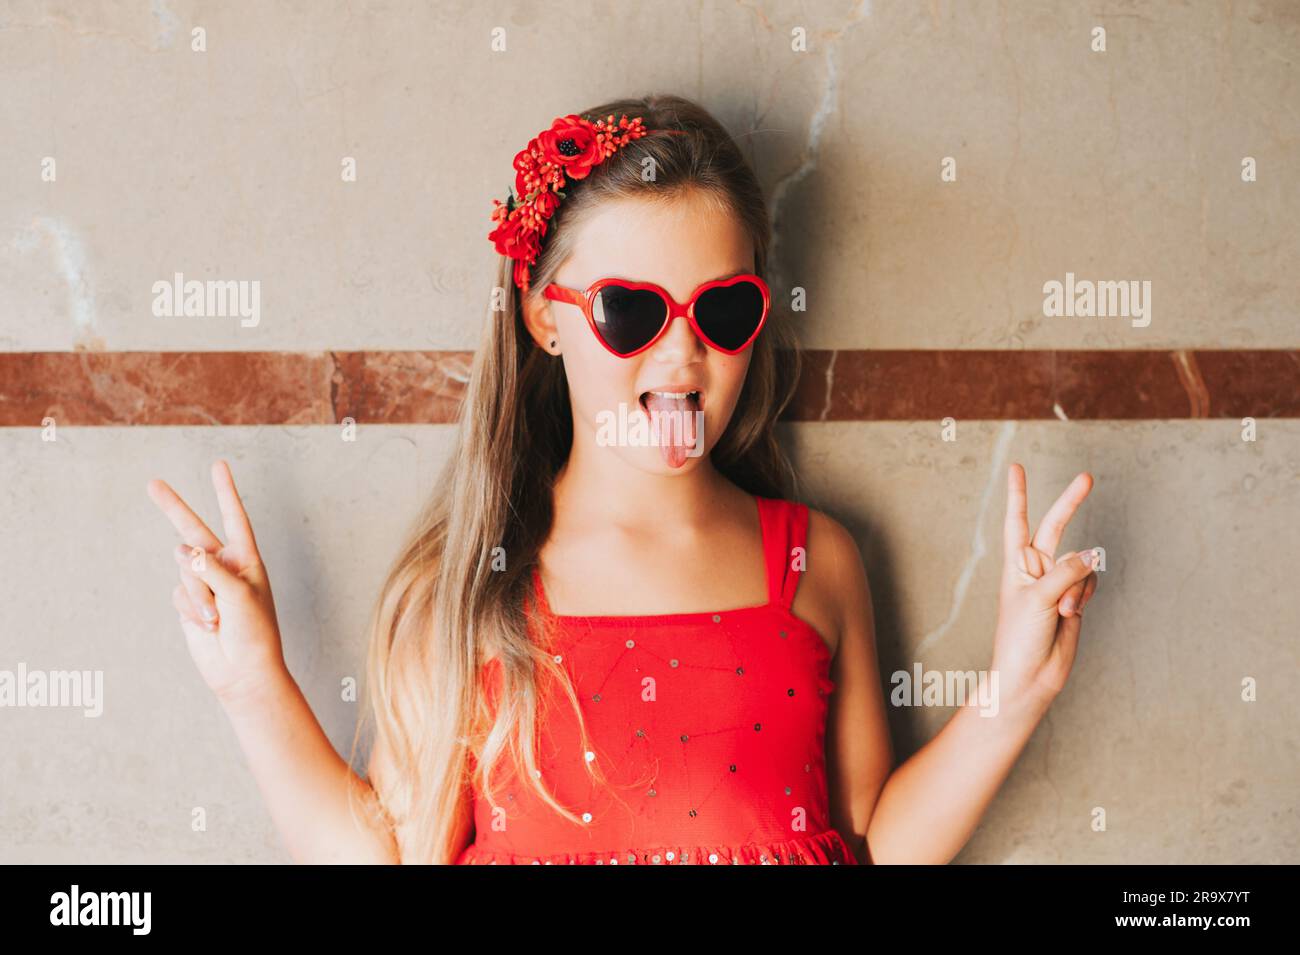 Funny portrait of pretty little girl wearing red dress and heart shaped sunglasses, pulling tongue Stock Photo